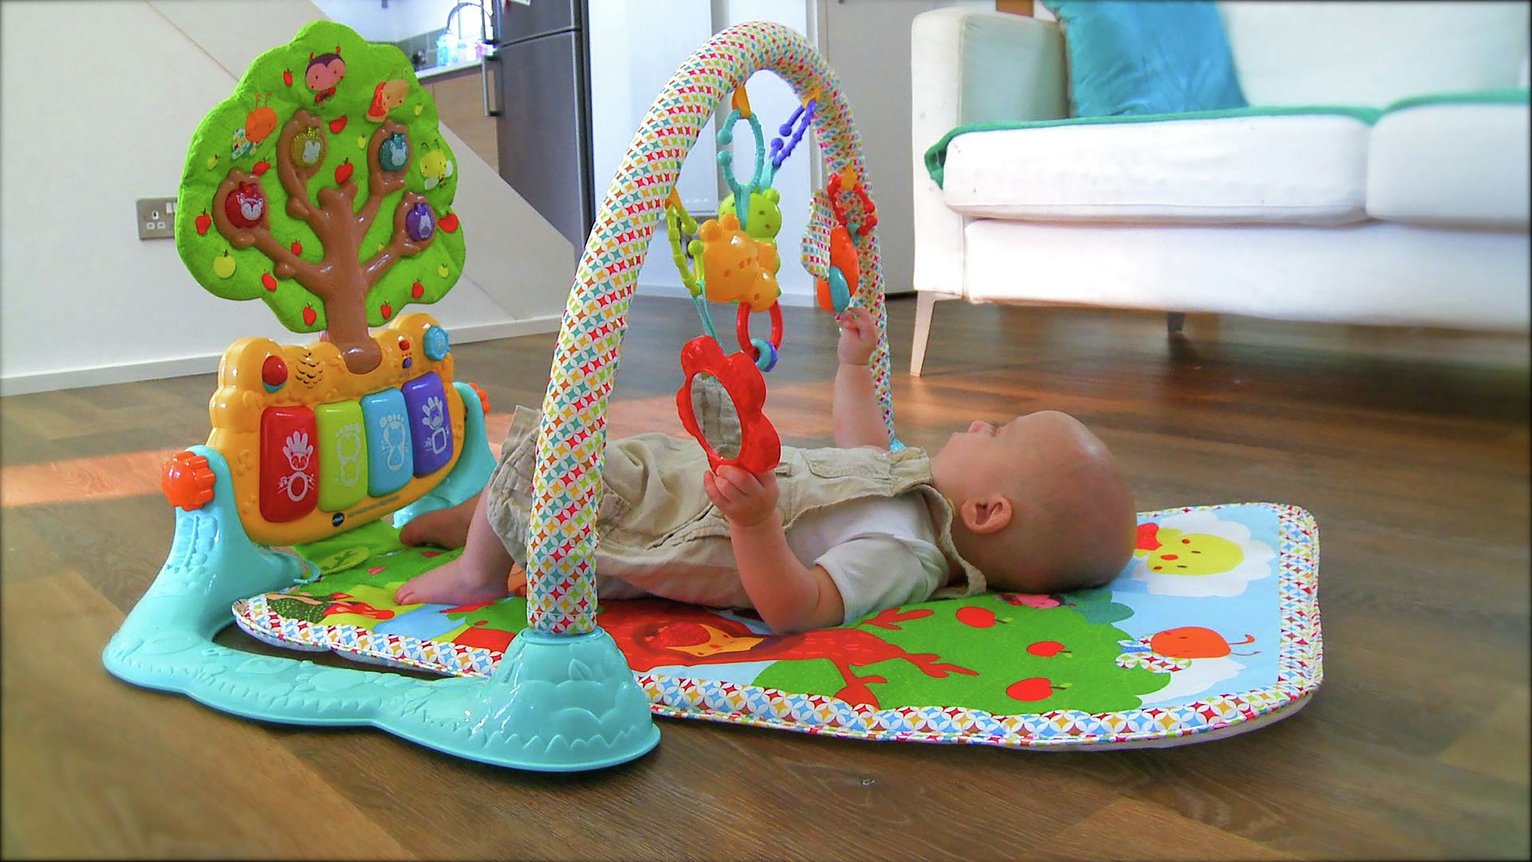 VTech Friendlies Glow and Giggle Playmat Review